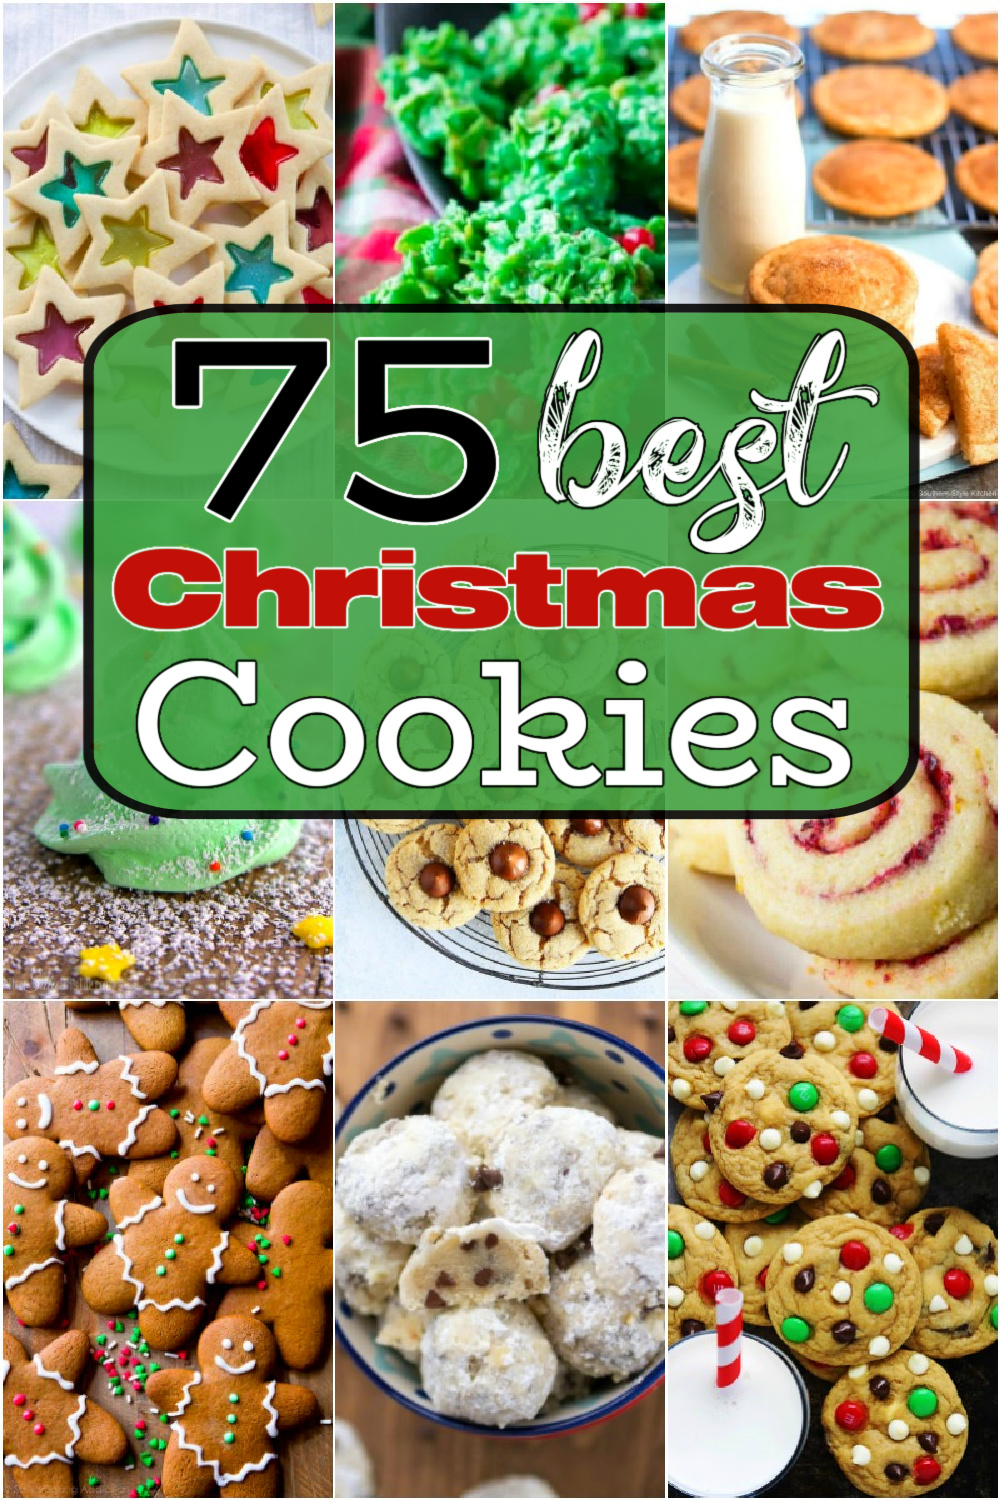 Plan a cookie swap with this collection of 75 Tasty Christmas Cookies #christmascookies #bestchristmascookies #cookierecipes #holidayrecipes #christmasbaking #cookieswap #cookieexchange #bestcookierecipes #desserts #dessertfoodrecipes #southernrecipes #southernfood #melissassouthernstylekitchen via @melissasssk